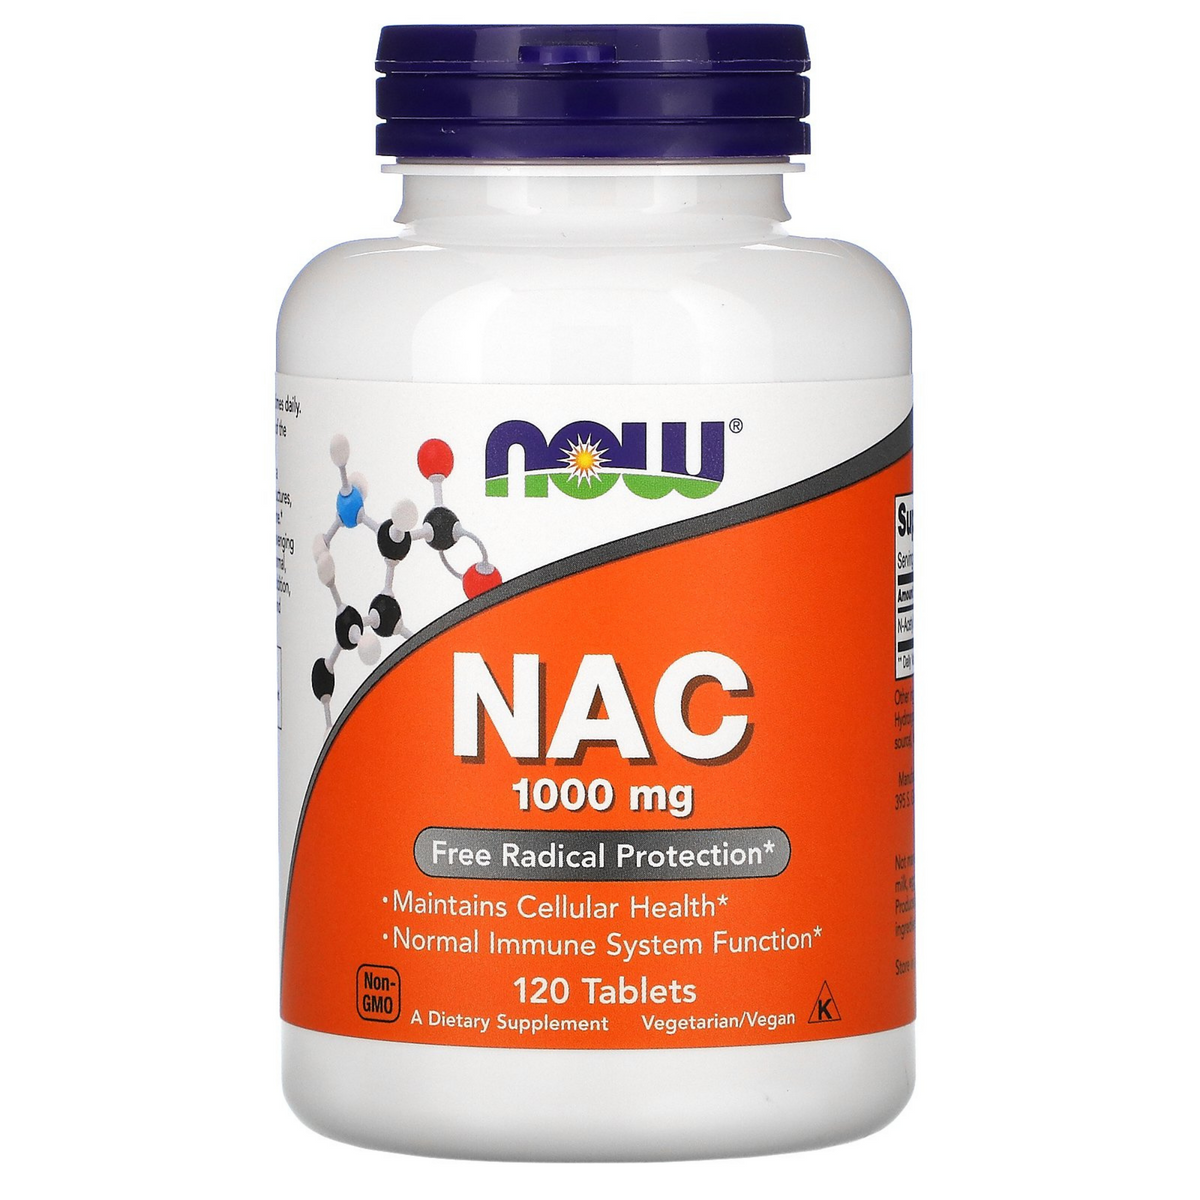 Primary Image of NAC 1000mg Tablets